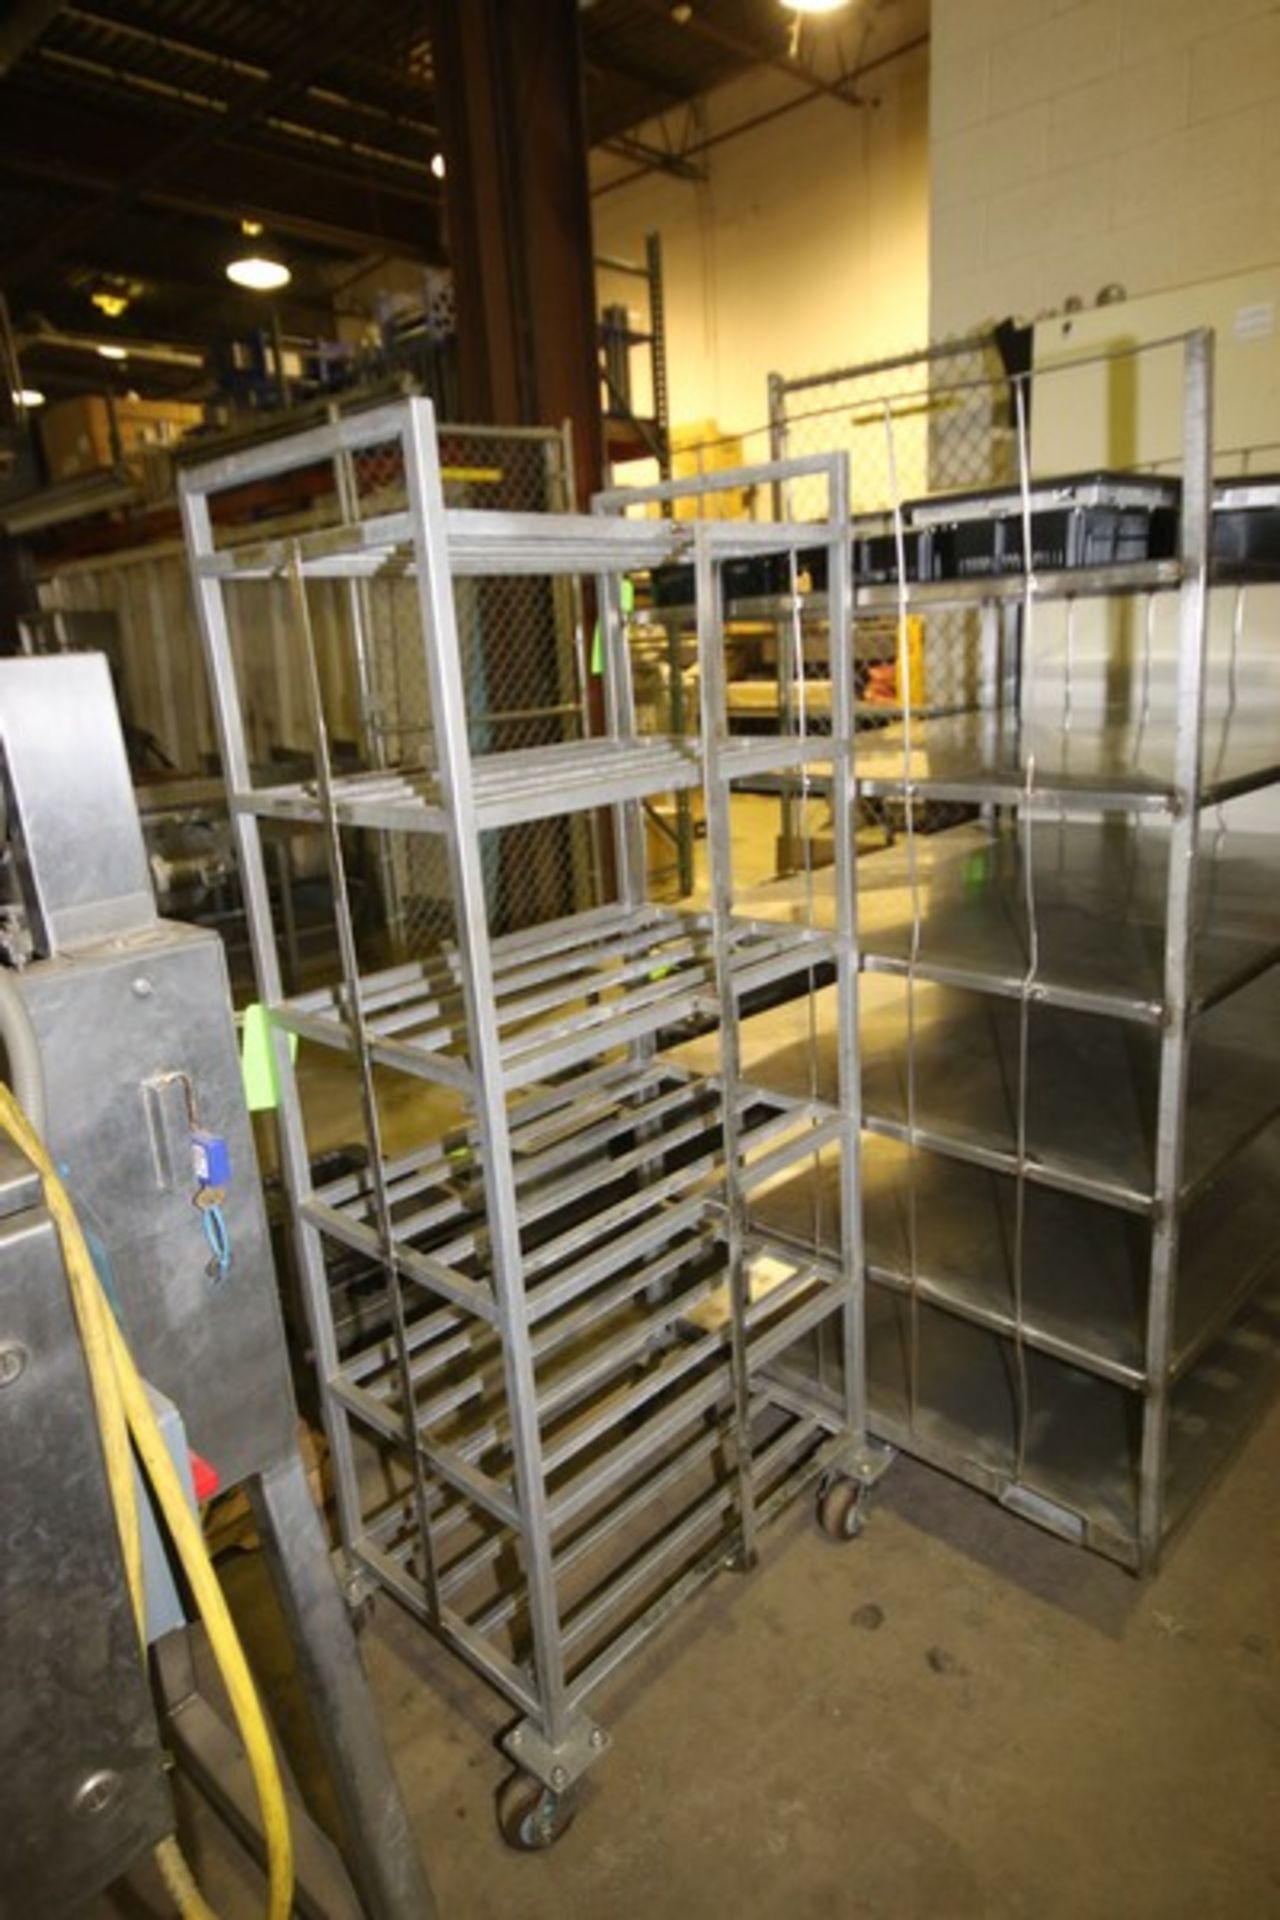 Portable S/S Racks, 1-with (6) S/S Shelves, Overall Dims.: Aprox. 51-1/2" L x 39-1/2" W x 74" - Image 4 of 5